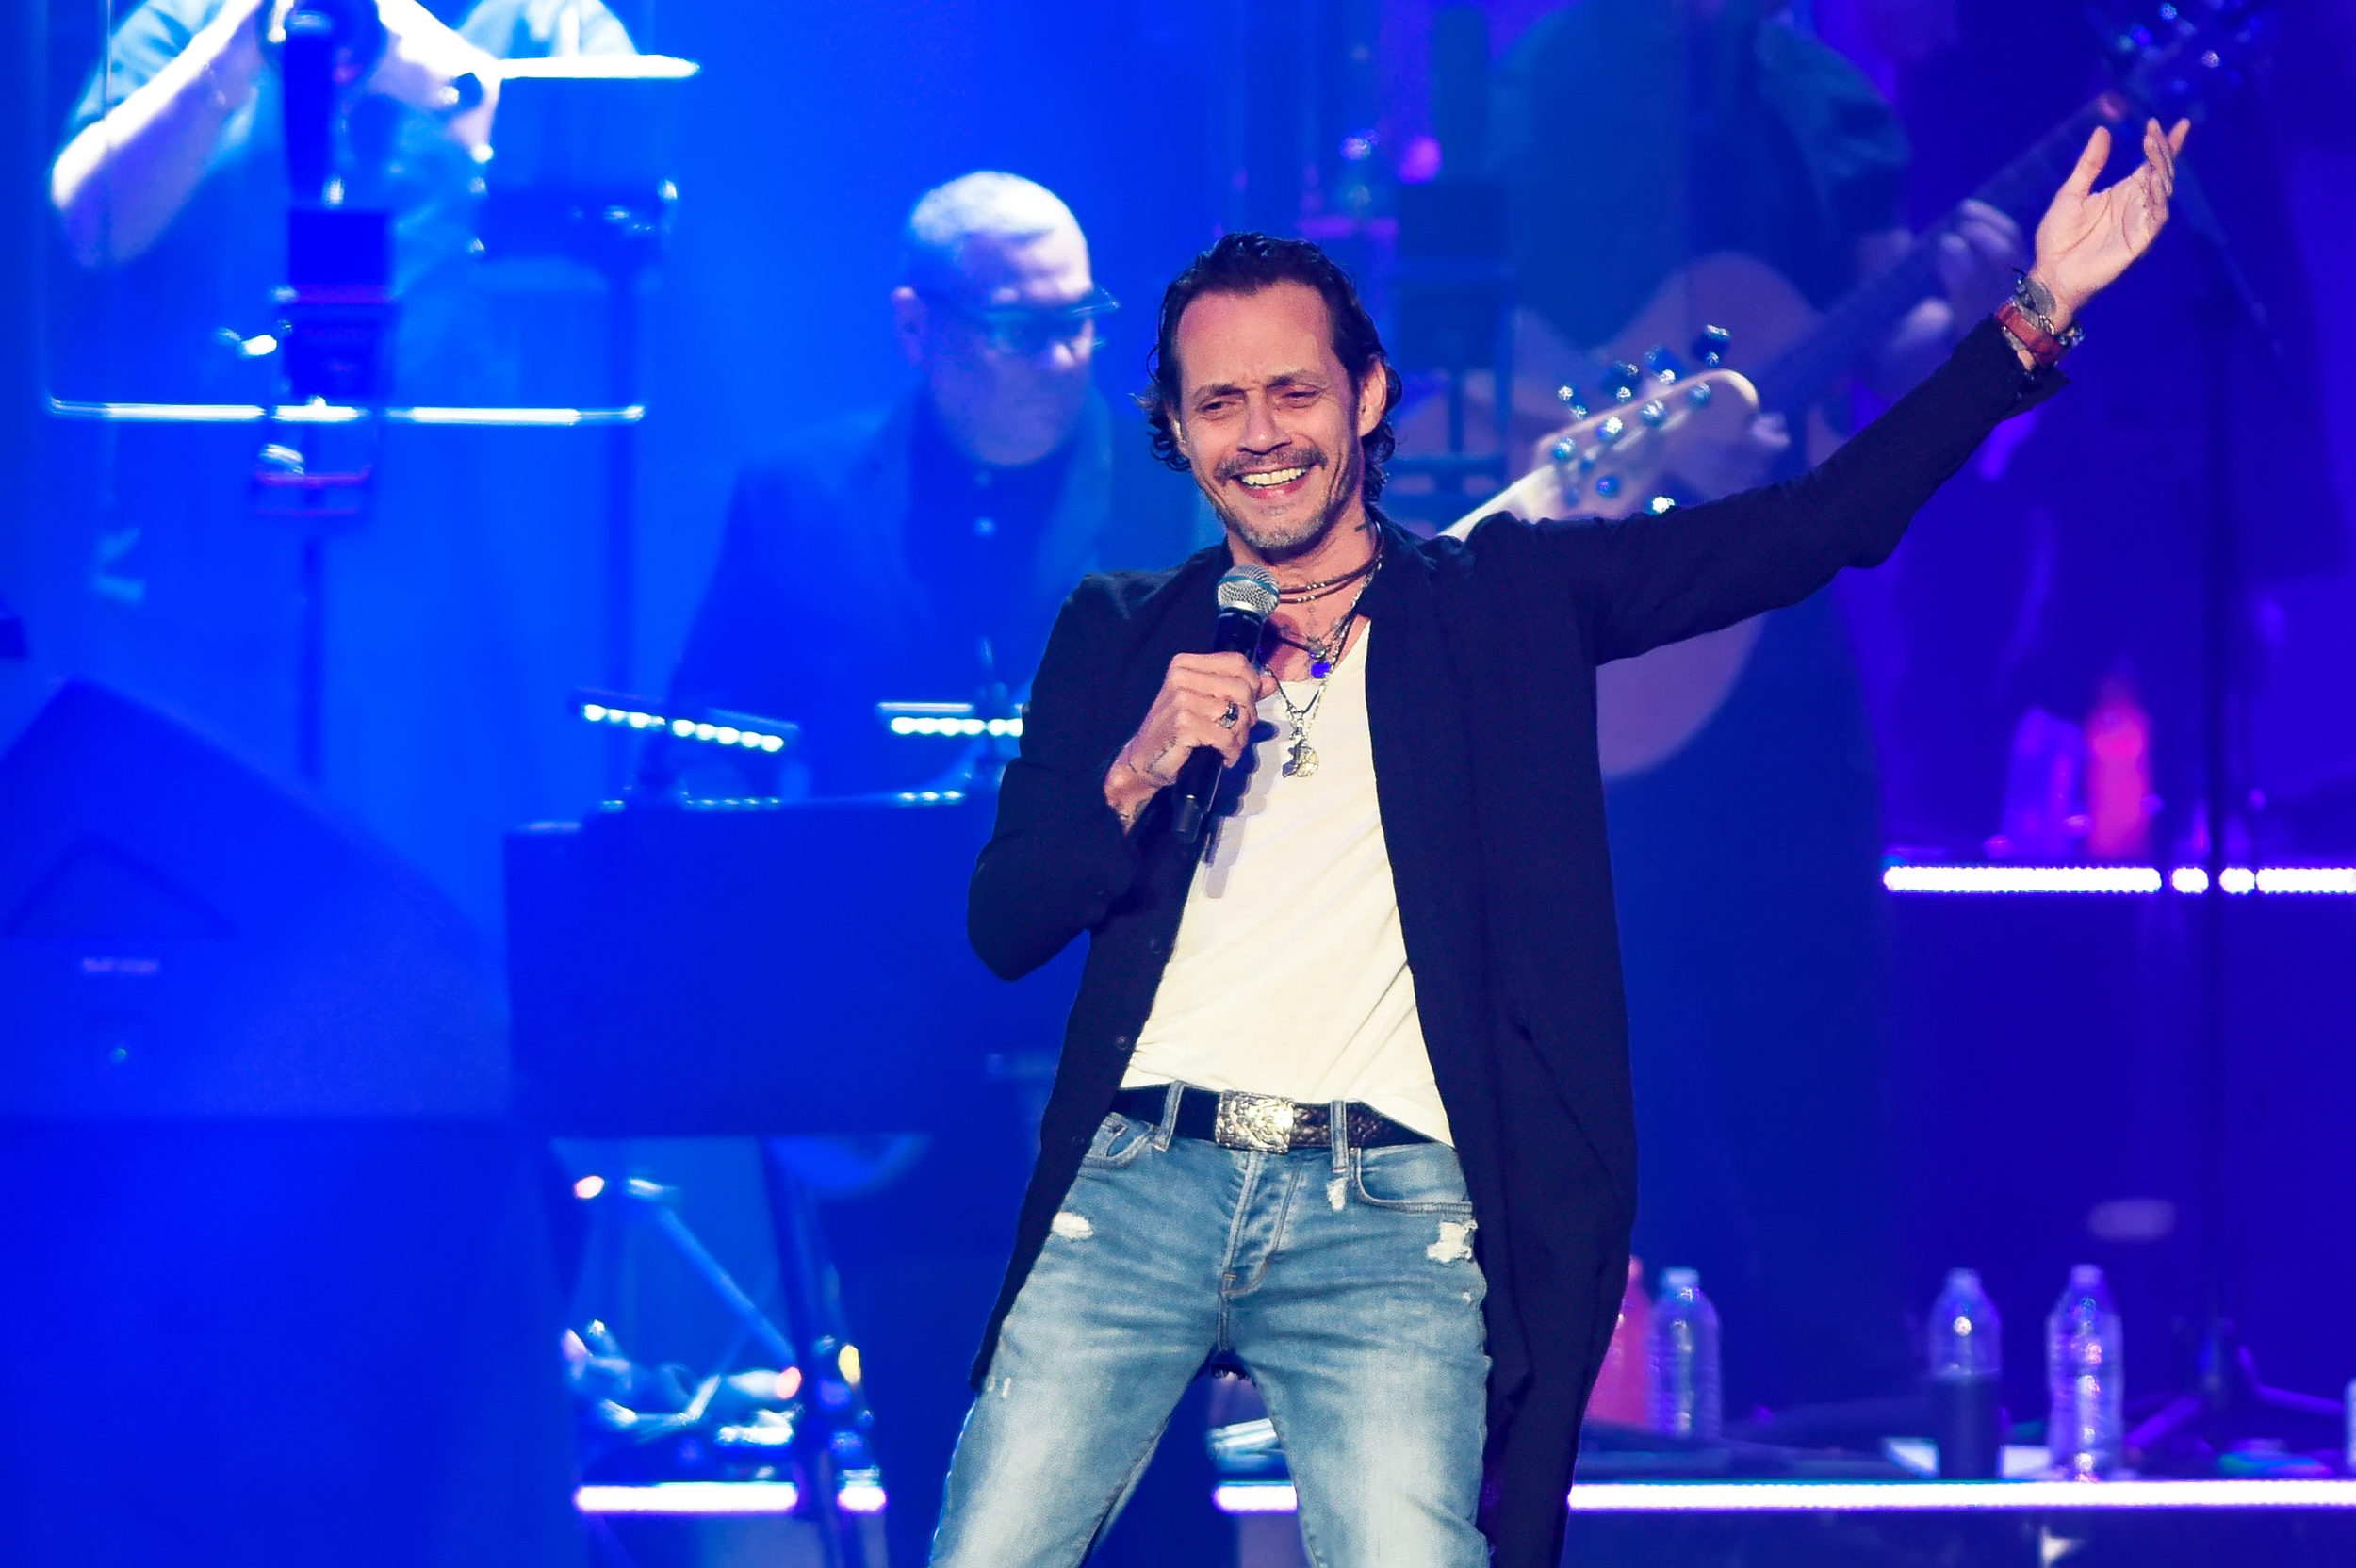 Marc Anthony in concert on the 2020 OPUS tour at the H.E.B. Center on March 1, 2020 in Cedar Park, Texas. Photo © Manuel Nauta